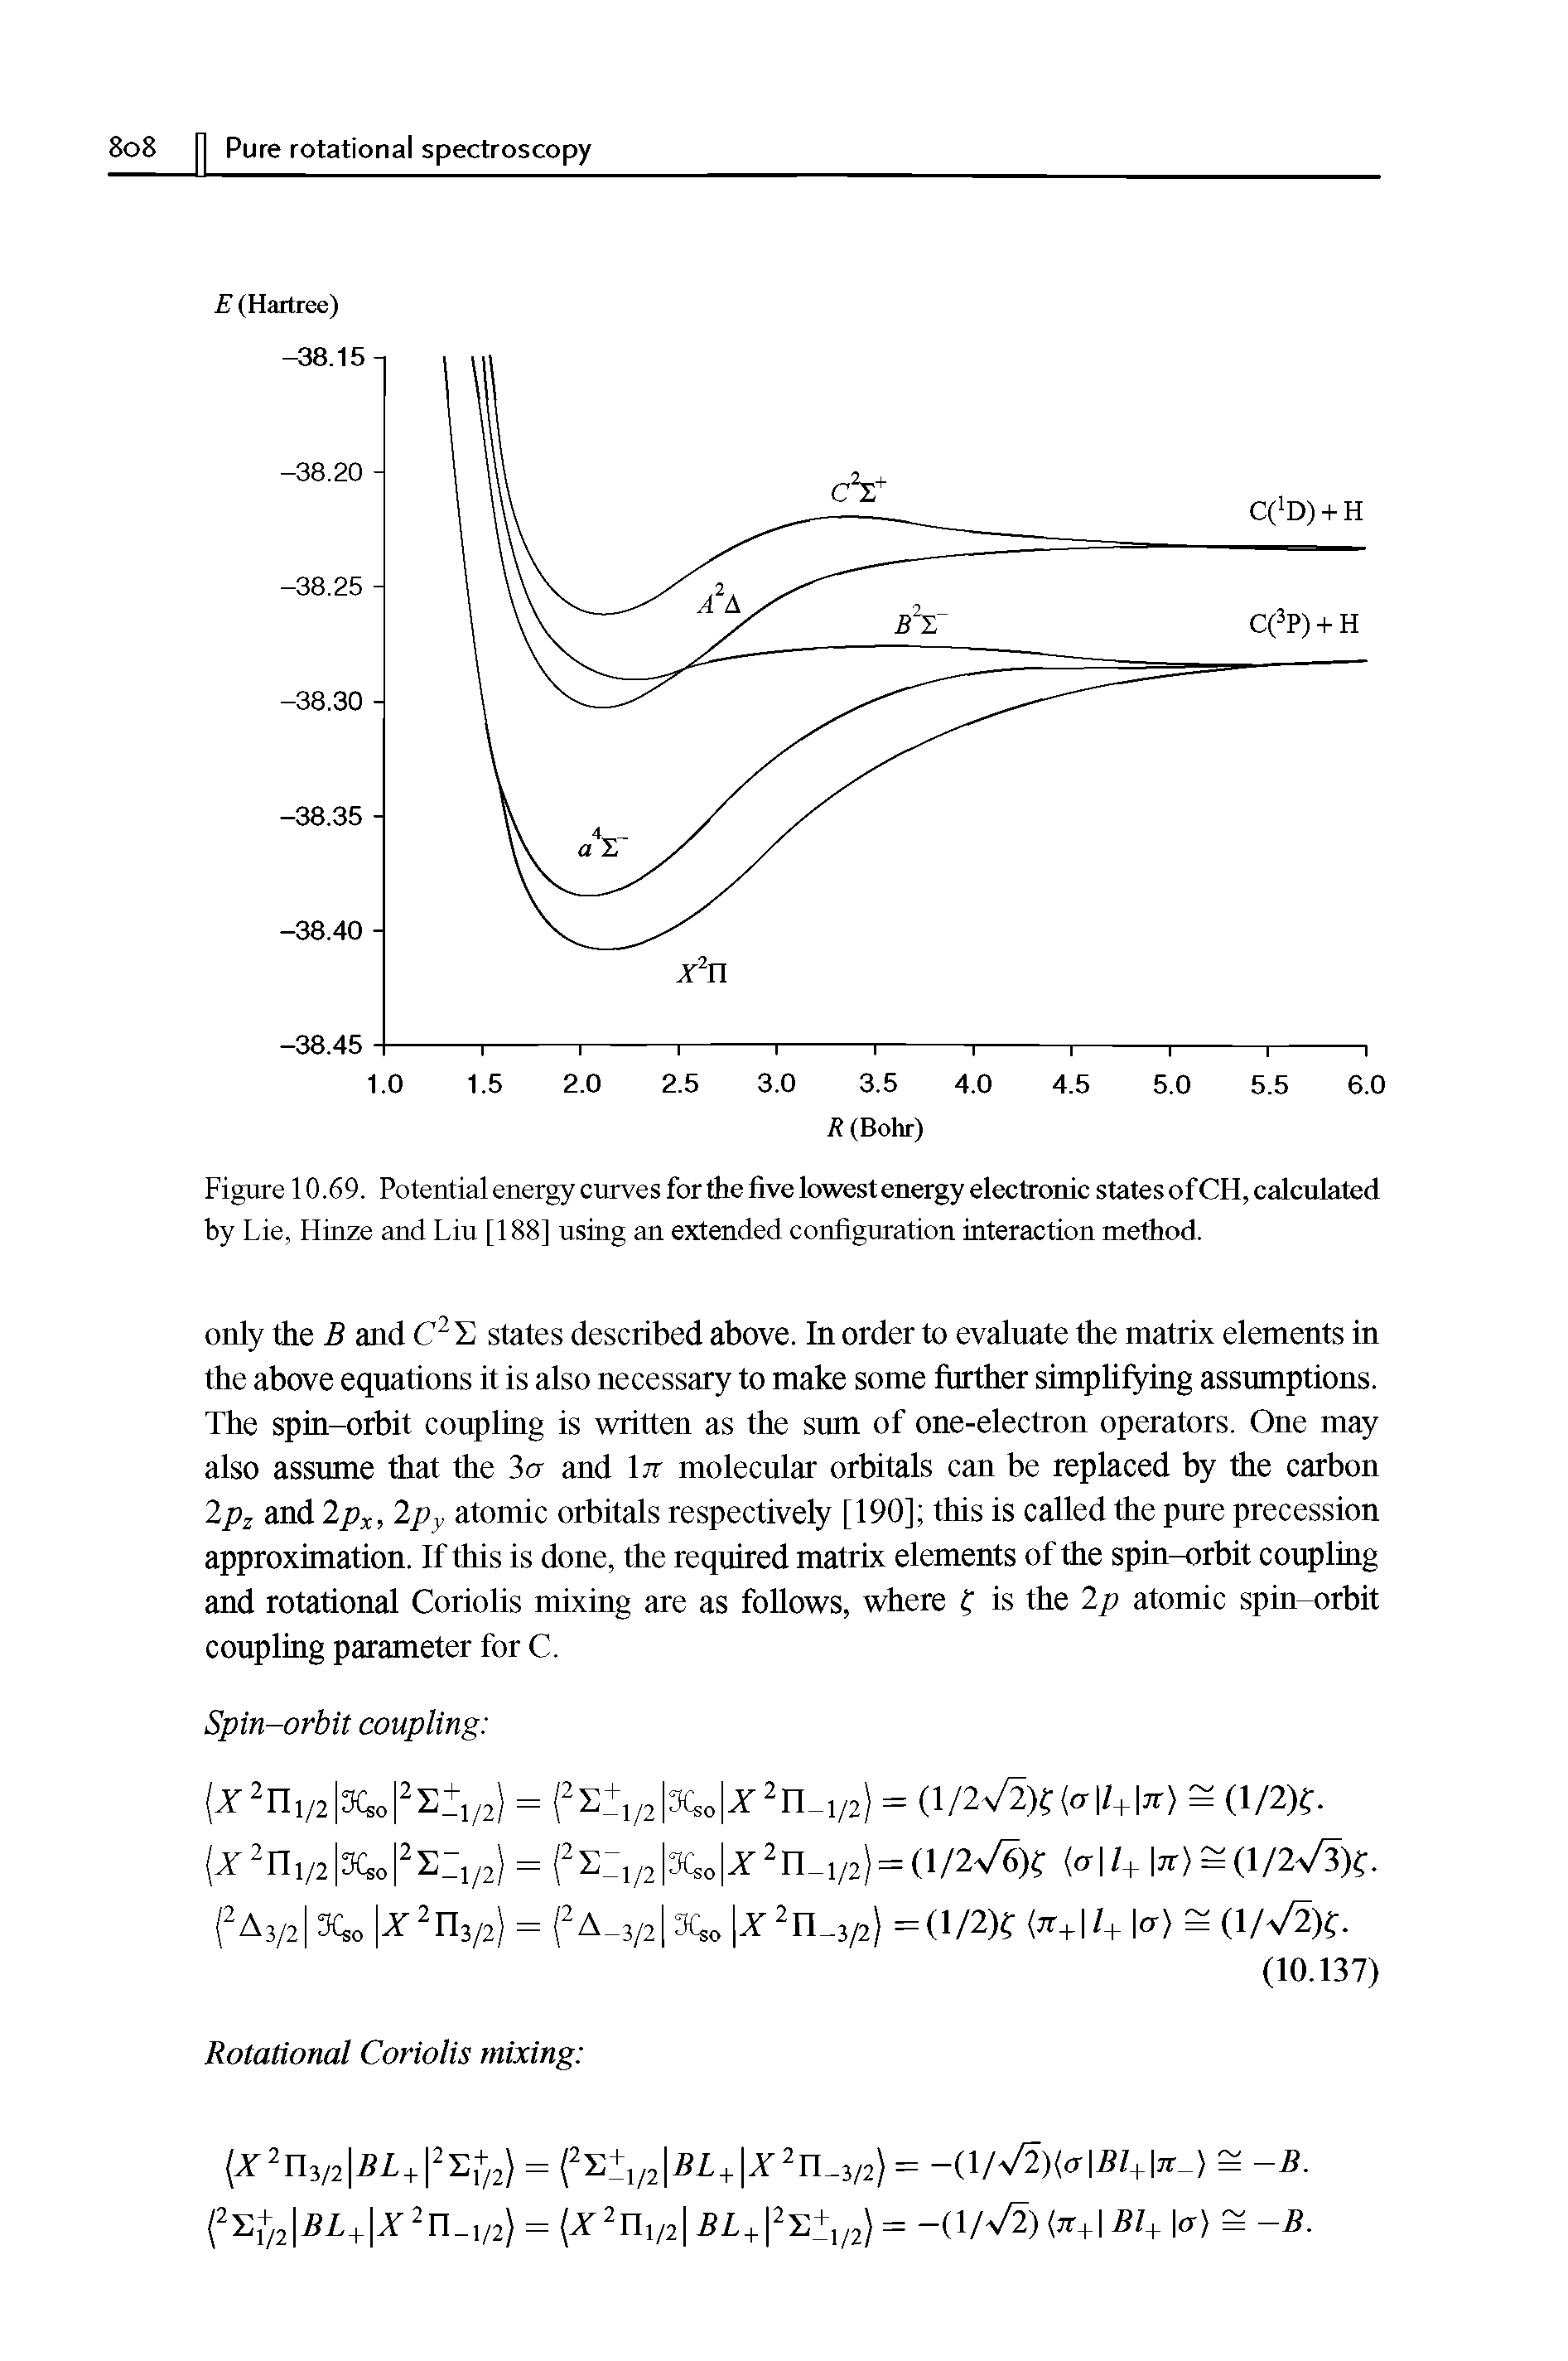 Figure 10.69. Potential energy curves for the five lowest energy electronic states of CH, calculated by Lie, Hinze and Liu [188] using an extended configuration interaction method.